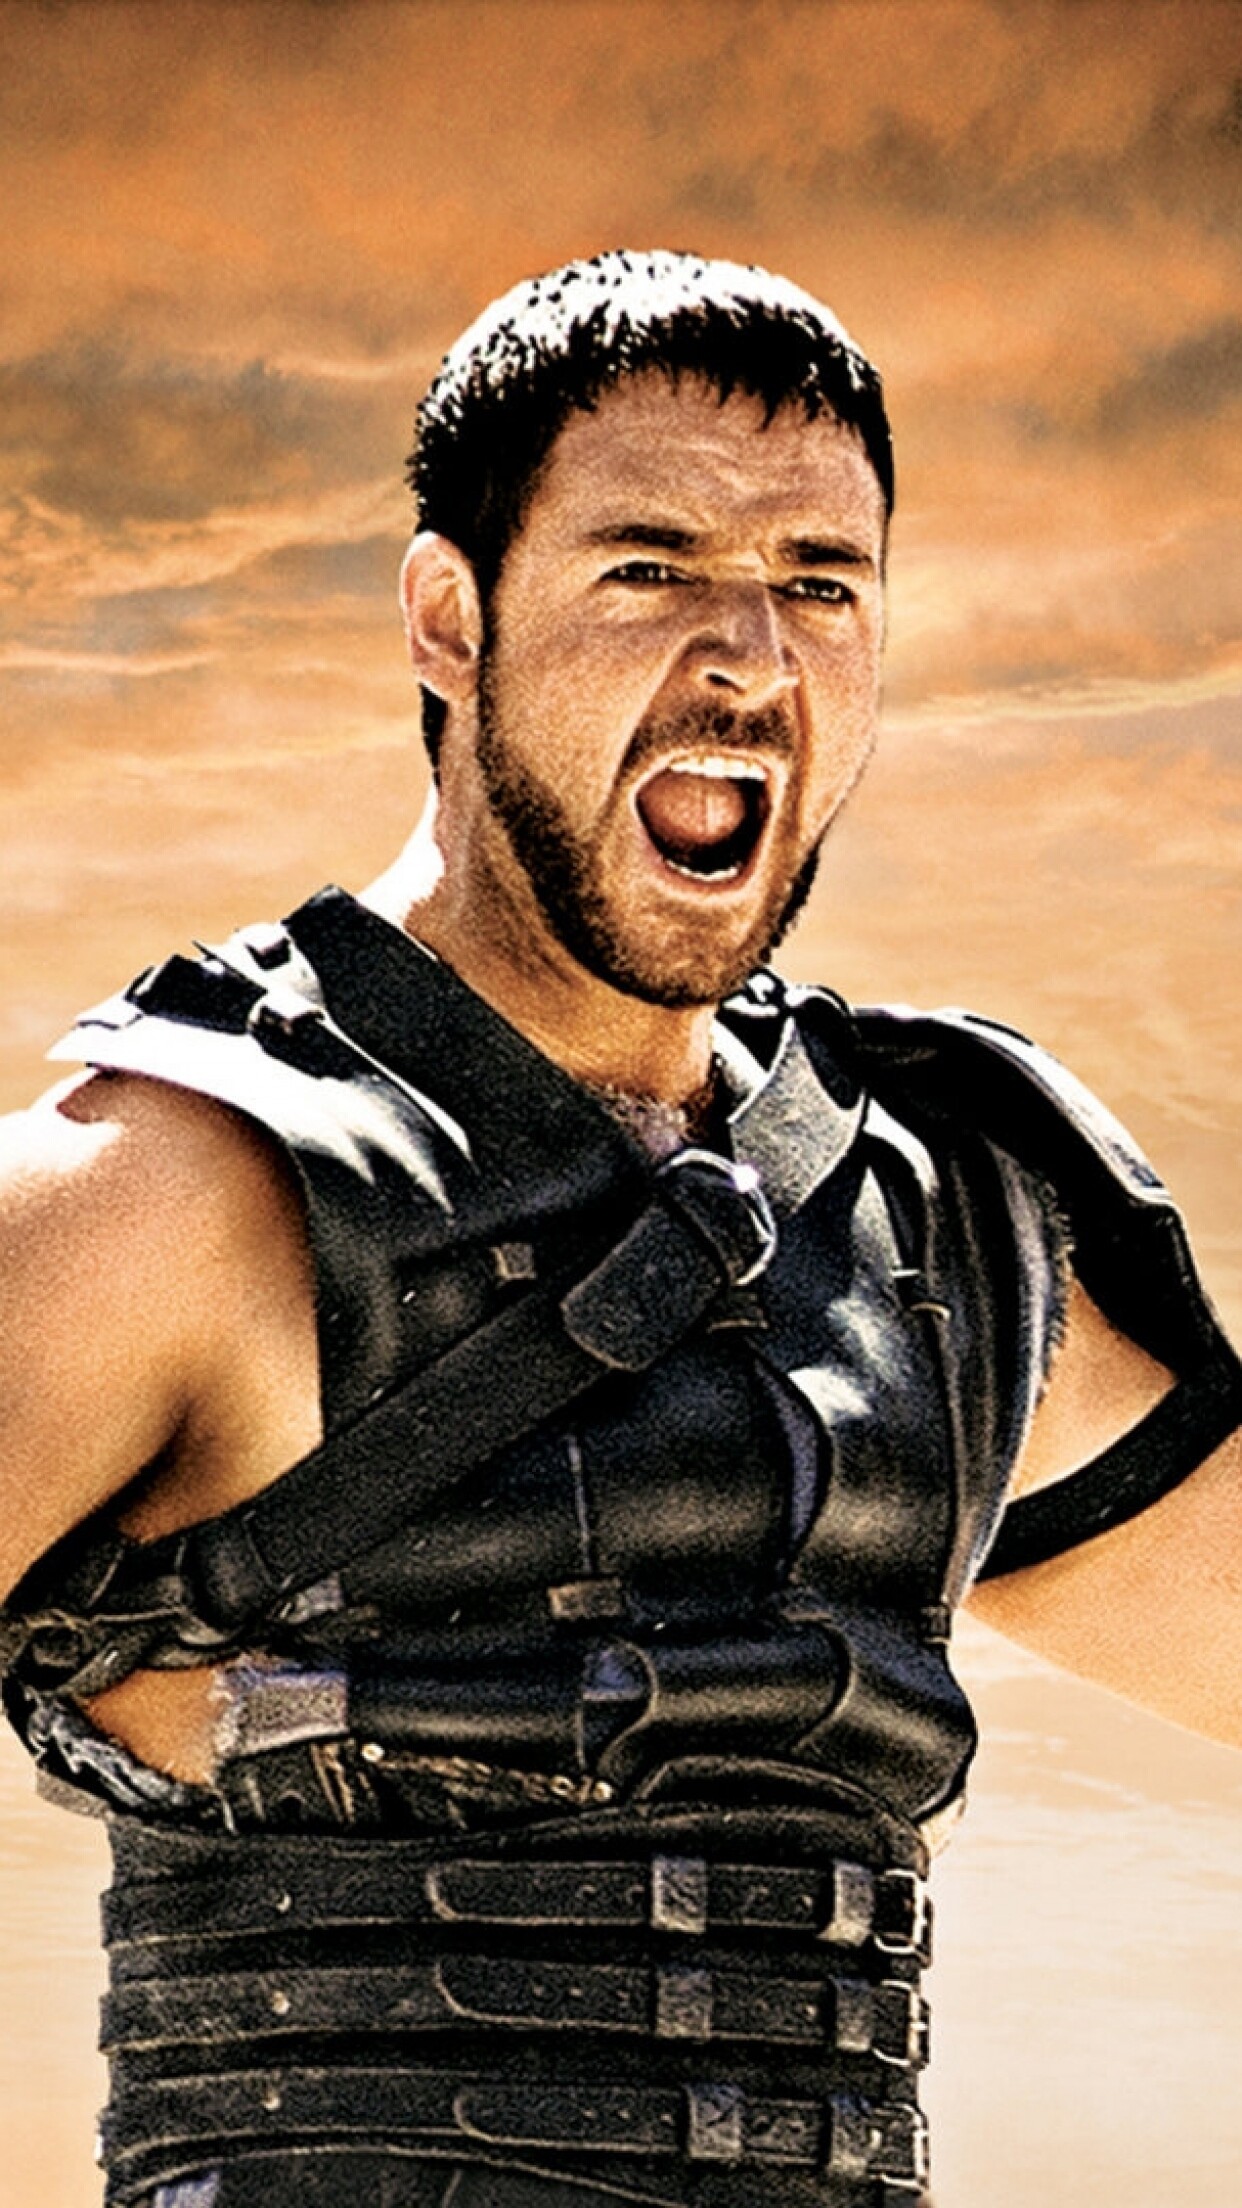 Gladiator: The film won five Academy Awards at the 73rd Academy Awards, including Best Picture and Best Actor for Crowe. 1250x2210 HD Wallpaper.